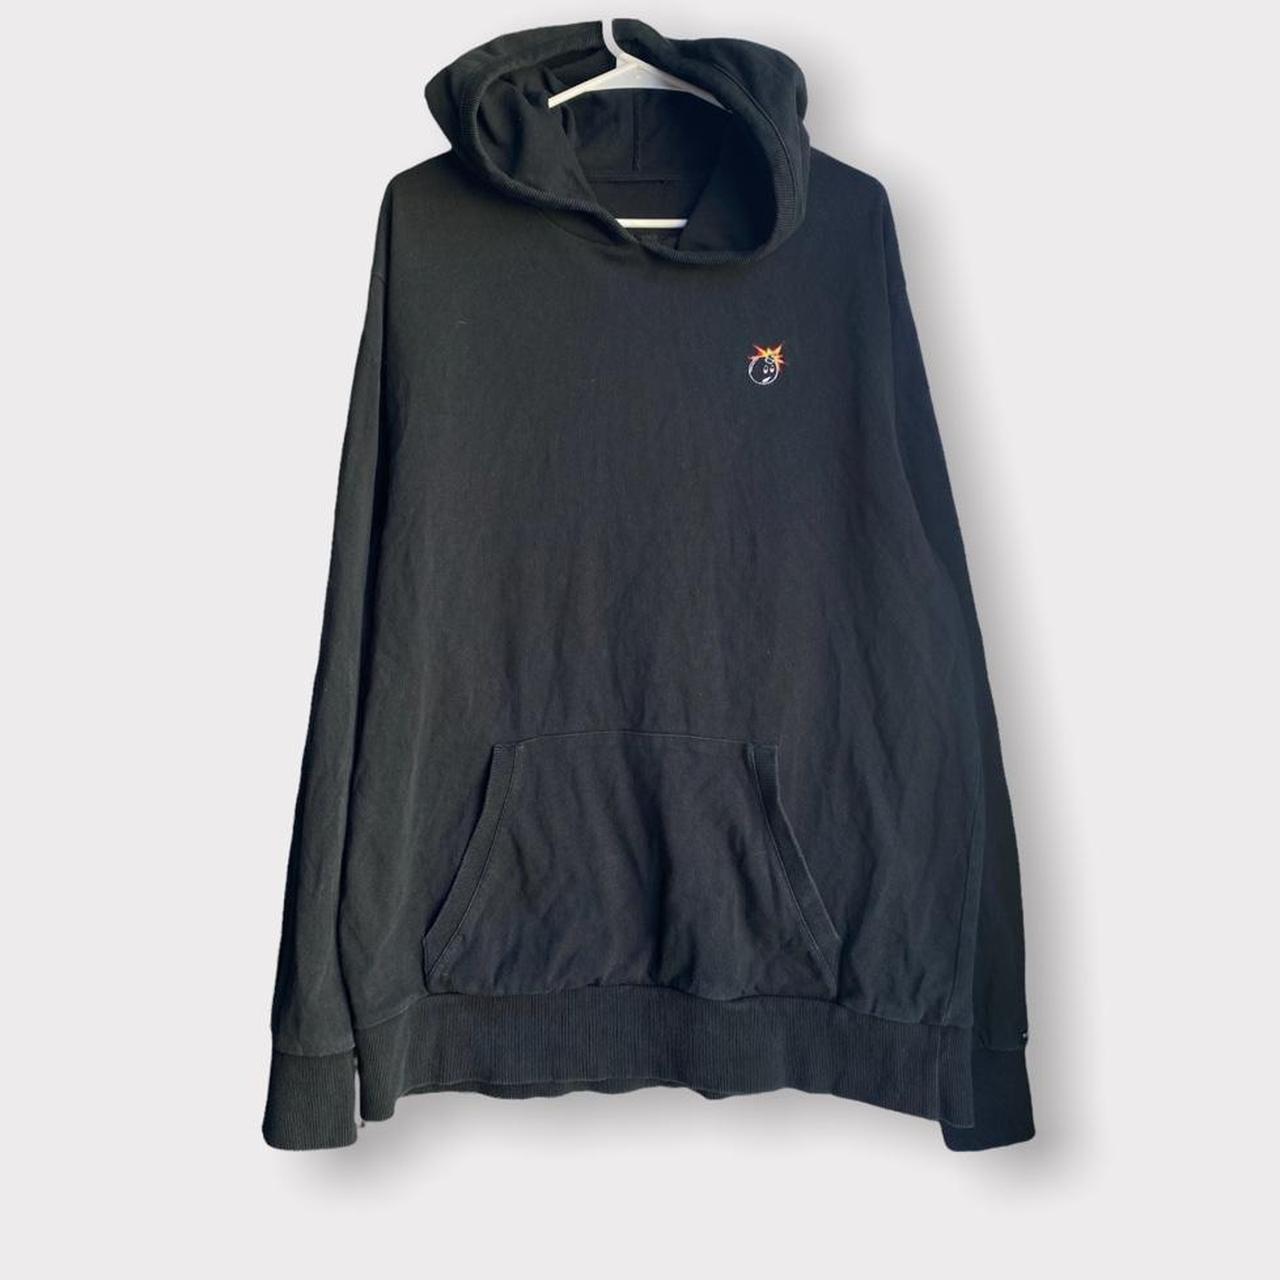 Product Image 1 - The hundreds bomb hoodie 
Doesn’t